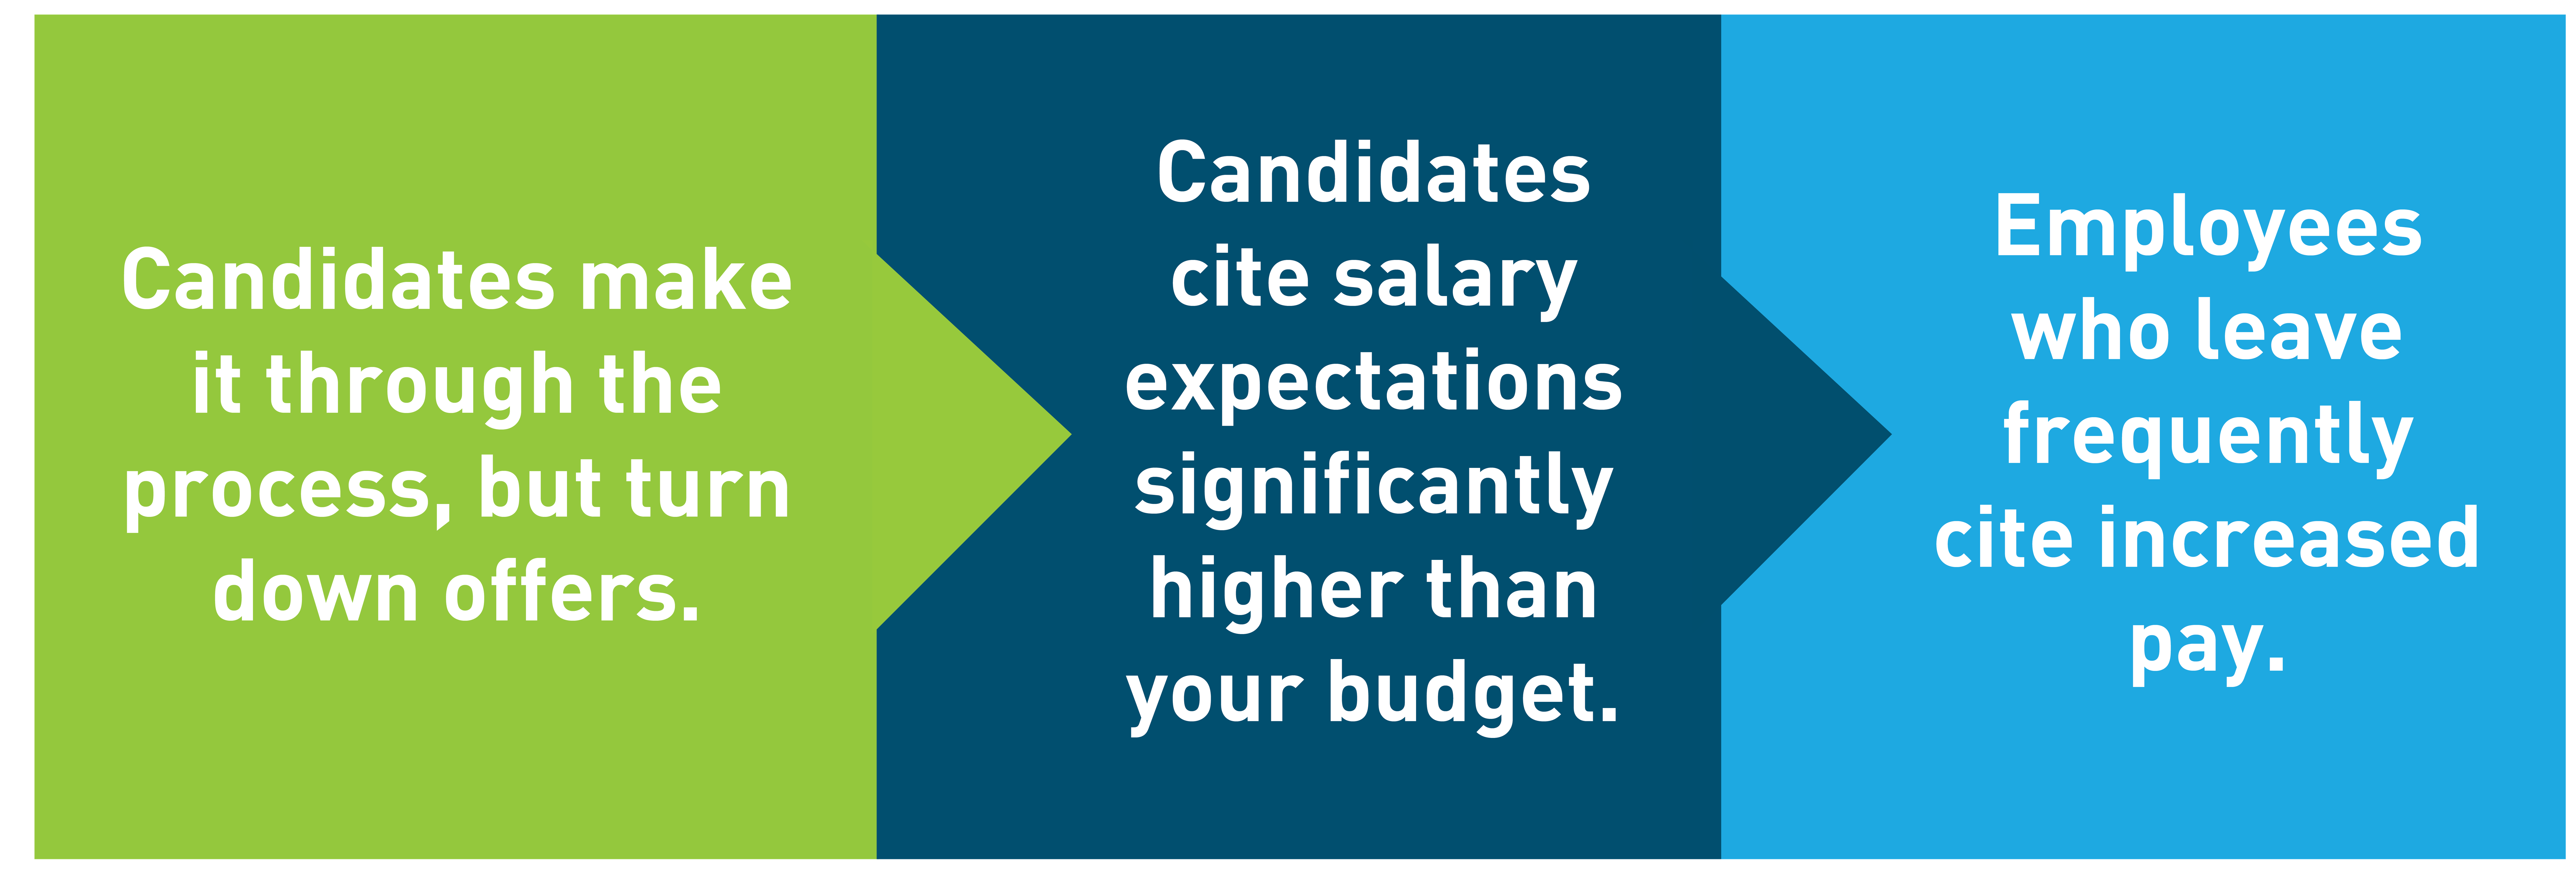 Candidates make it through the process, but turn down offers. 
Candidates cite salary expectations significantly higher than your budget. 
Employees who leave frequently cite increased pay. 